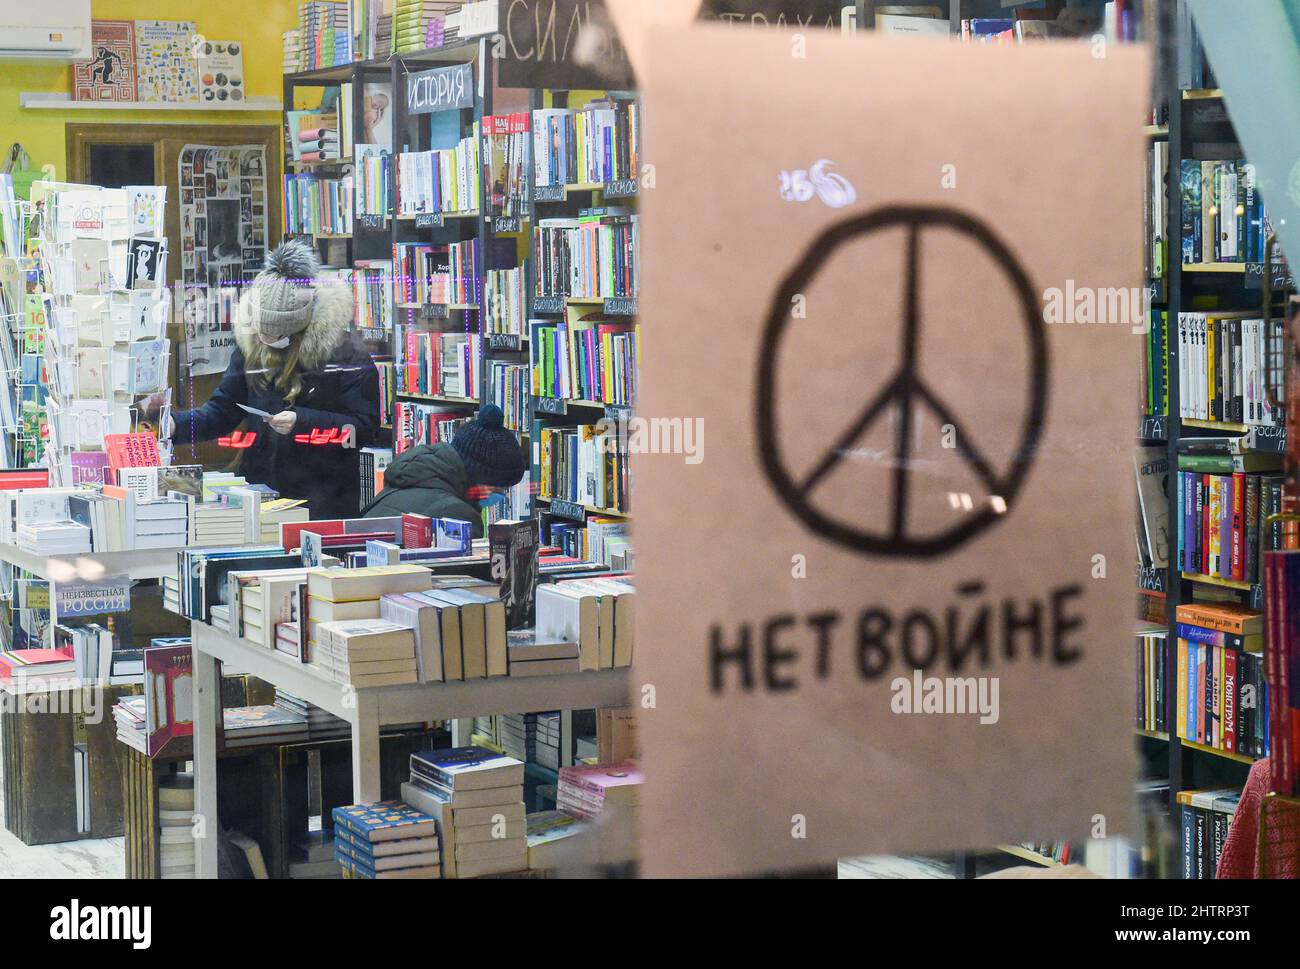 Genre photography. Continuation of the uncoordinated protest action against the special military operation of the Russian Armed Forces in Ukraine. Showcase of one of the bookstores in the city with a poster 'No war'. Bookstore buyers during book selection. 02.03.2022 Russia, Novosibirsk region, Novosibirsk Photo credit: Vlad Nekrasov/Kommersant/Sipa USA Stock Photo